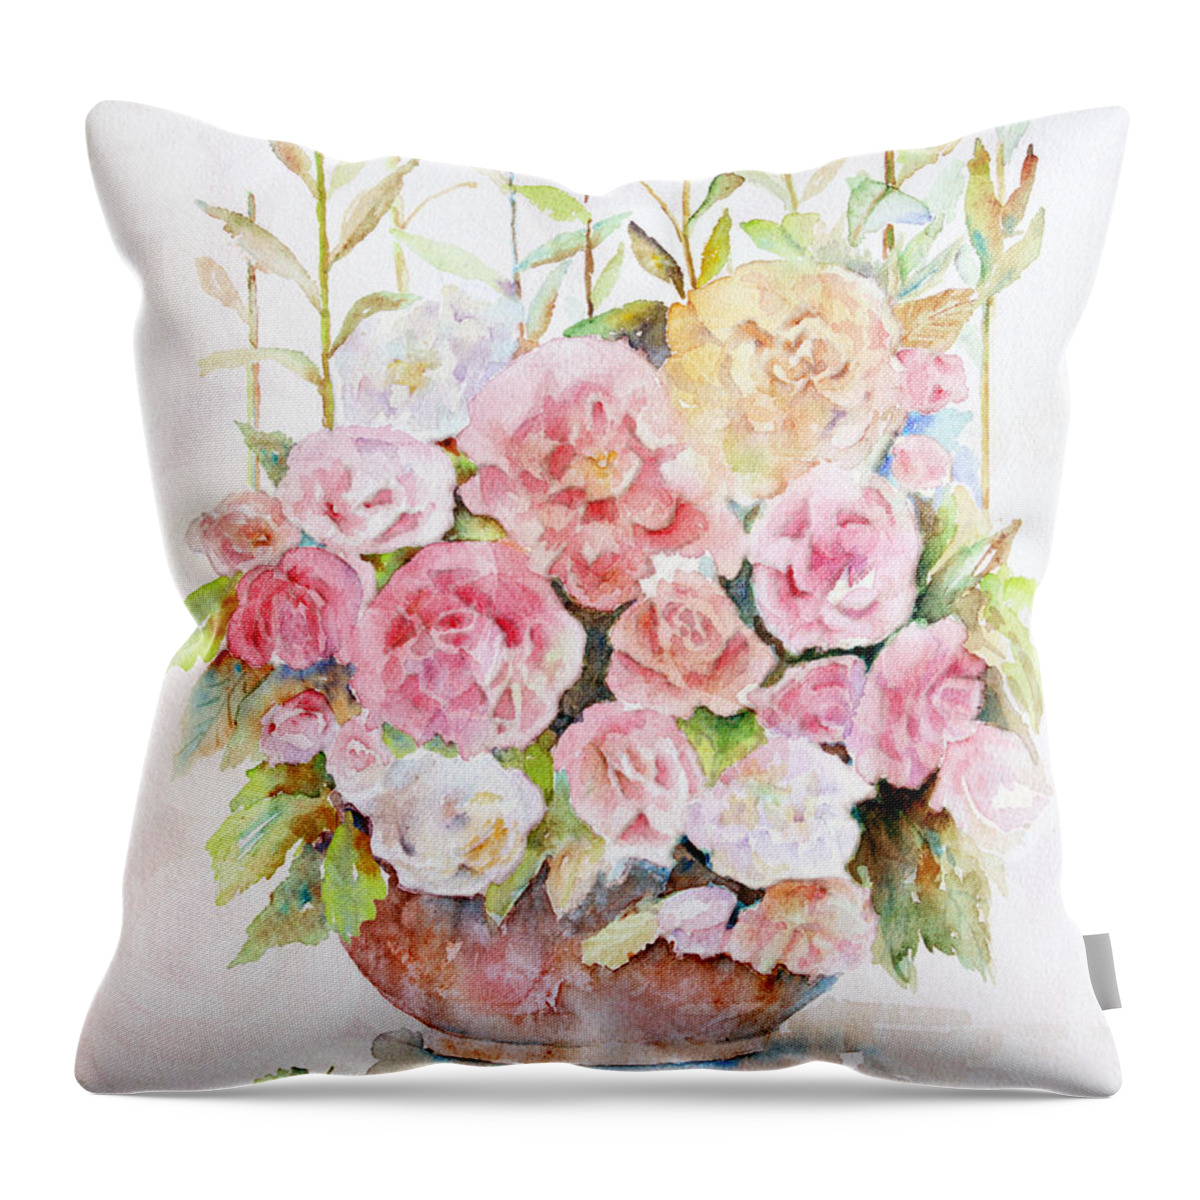 Rose Throw Pillow featuring the painting Bowl Full Of Roses by Arline Wagner